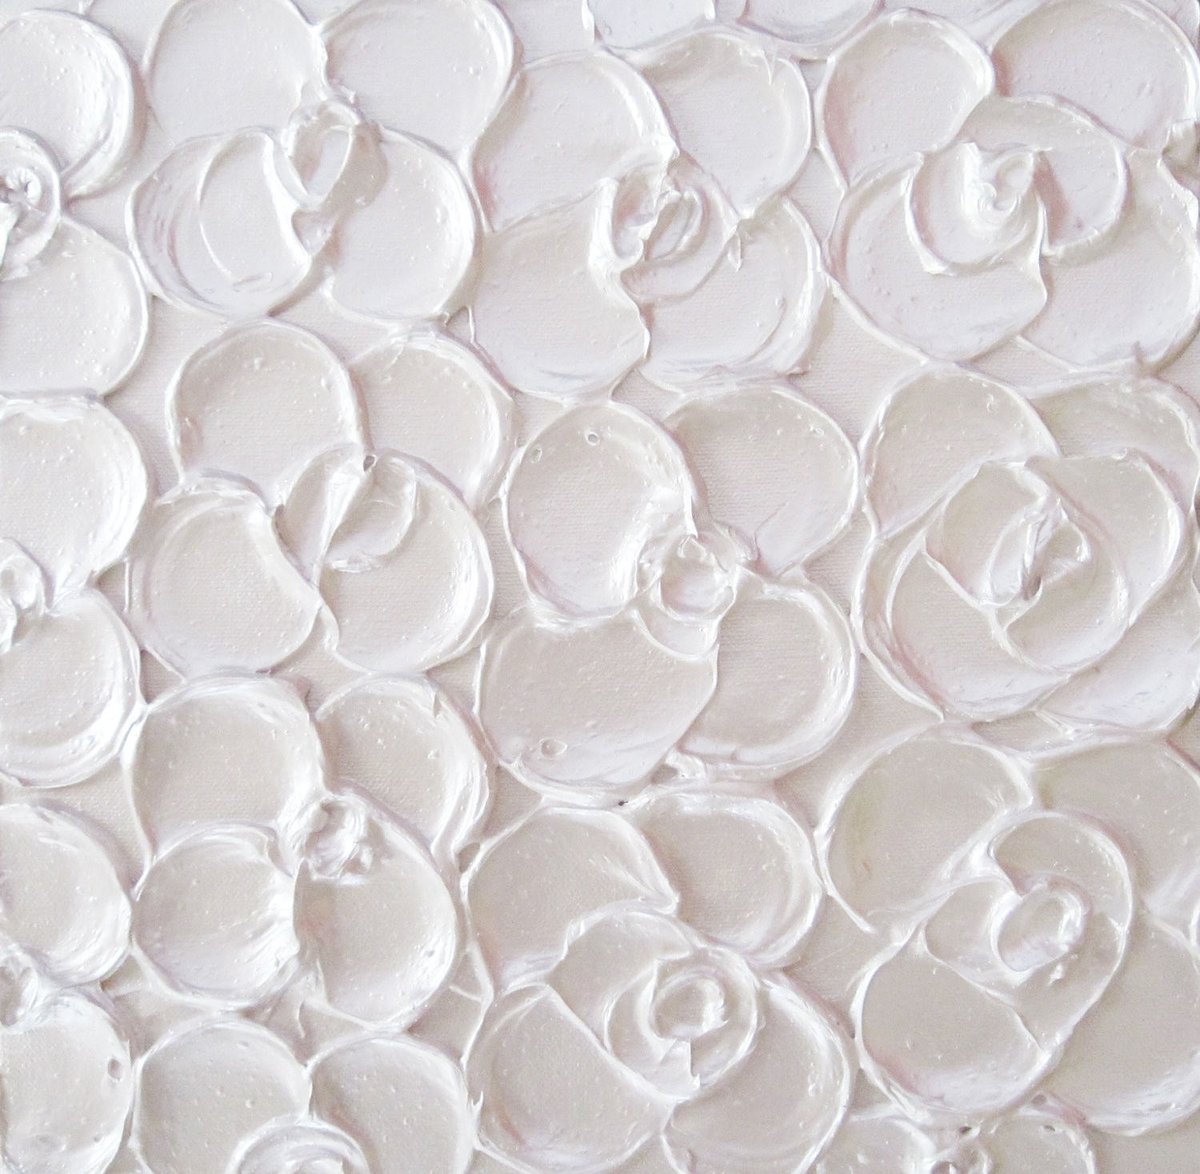 CUSTOM for SHARON Original Painting Abstract Pearl White Textured Floral Sculpted Fine Art 30x30"